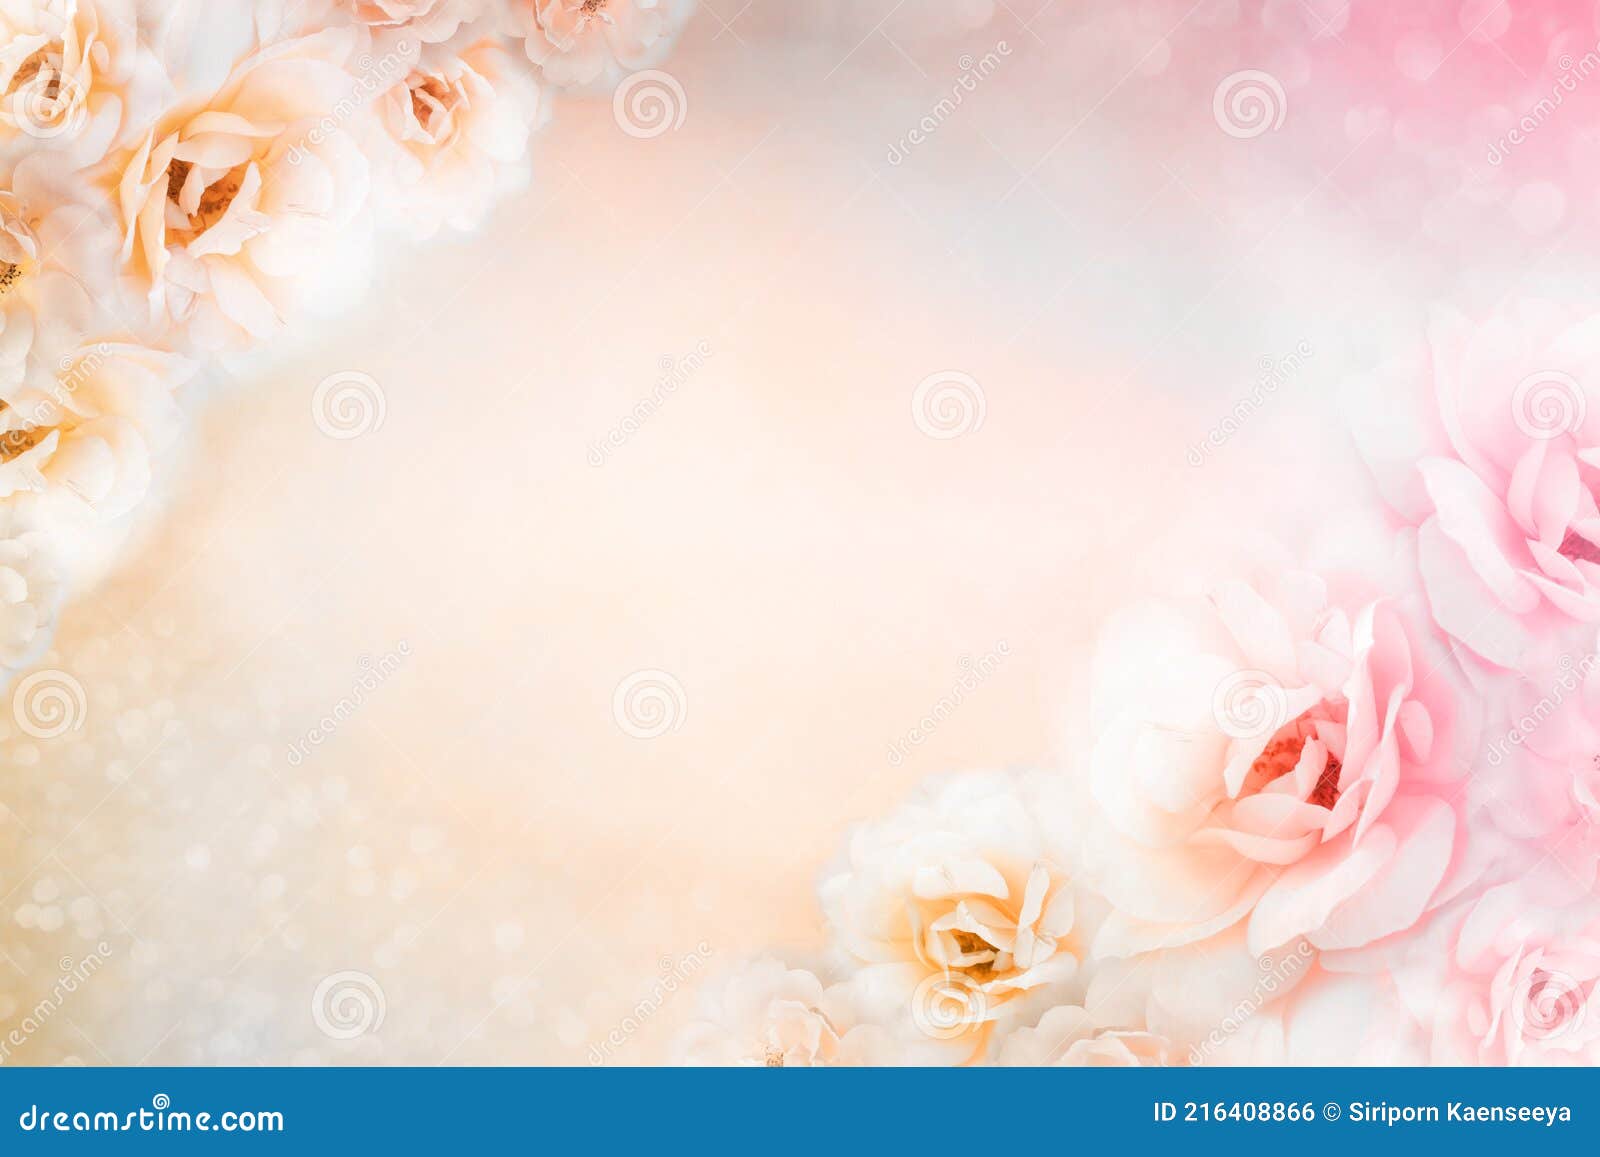 Light Pink and White Rose Floral Border Vintage Background Design for  Mother`s Day Card Stock Photo - Image of copy, blur: 216408866